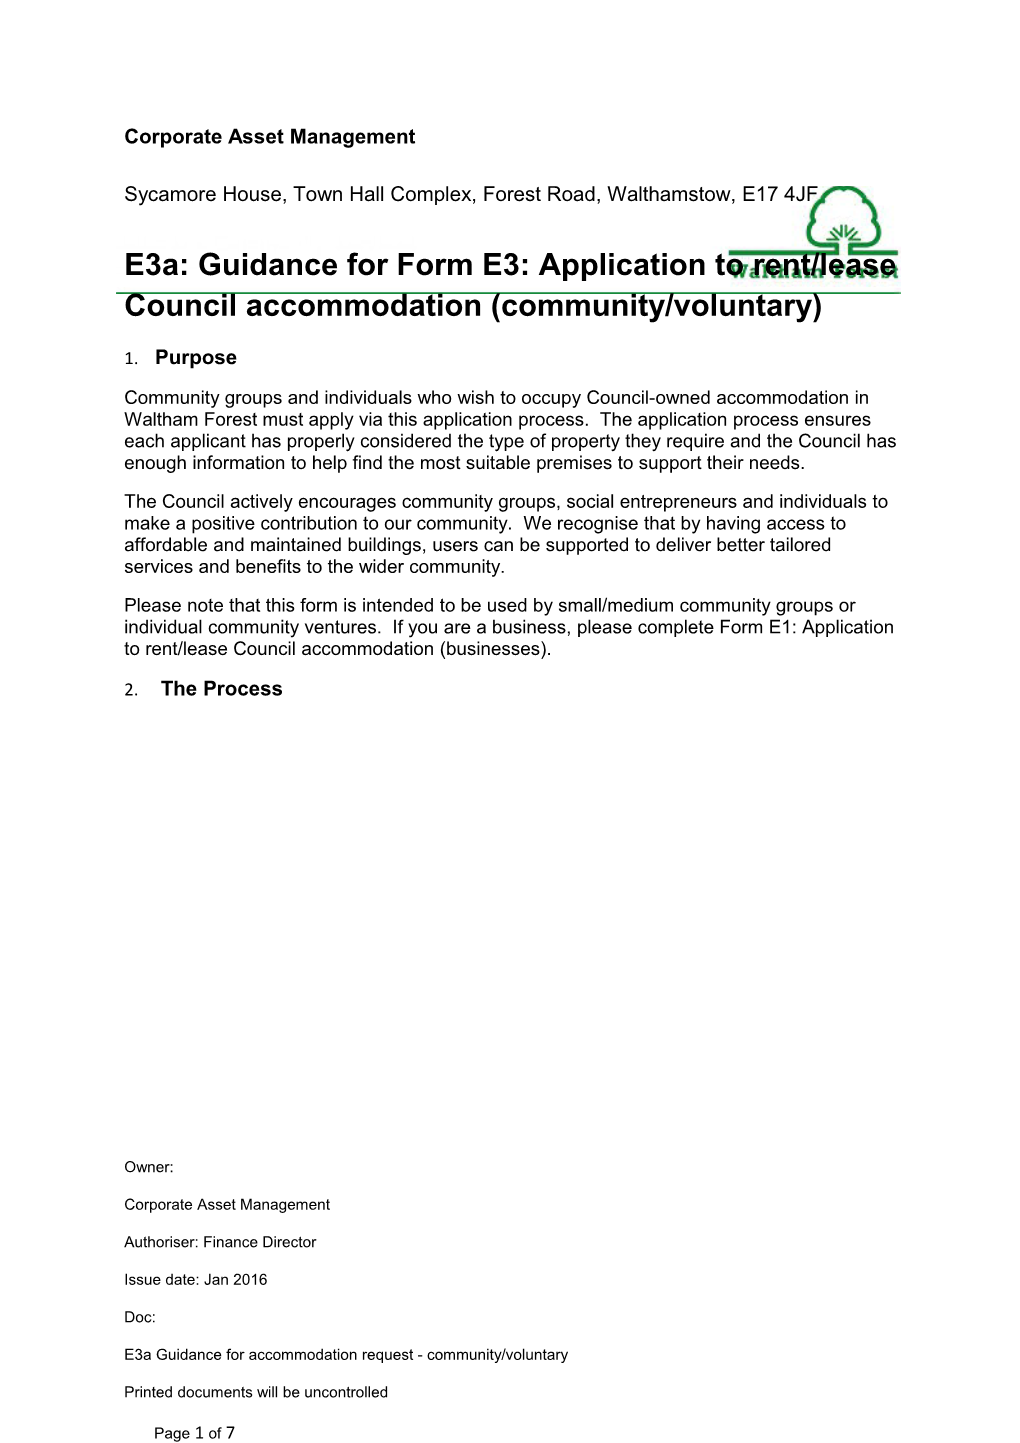 E3a: Guidance for Form E3: Application to Rent/Lease Council Accommodation